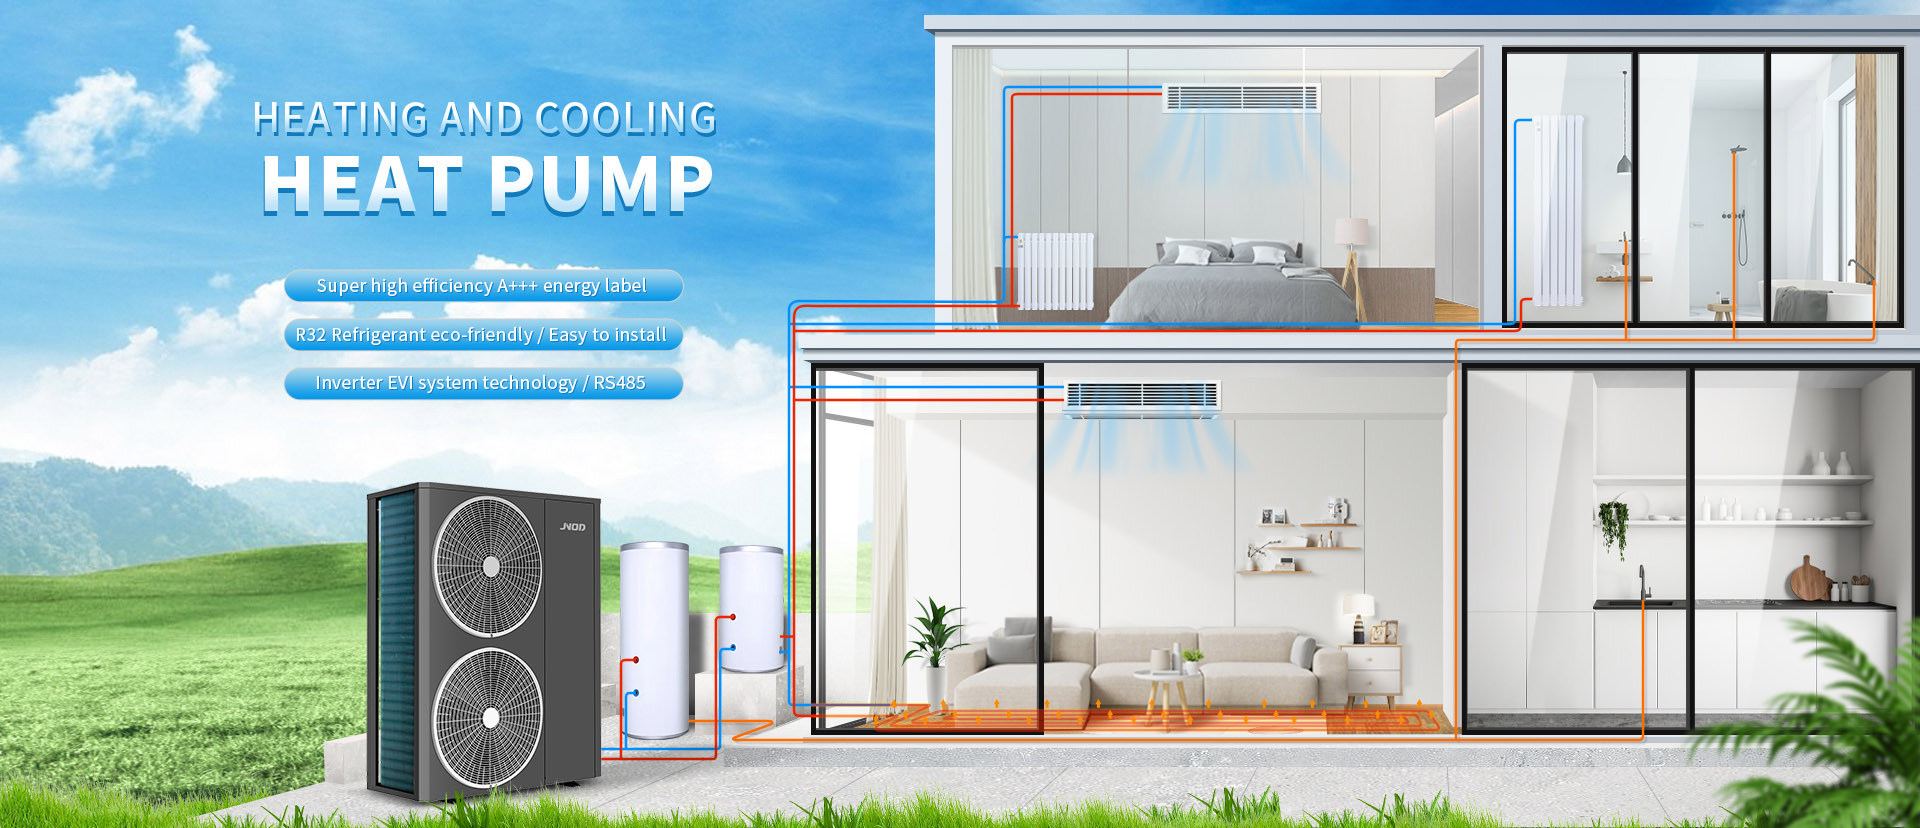 Erp A++ Heating And Cooling Heat Pump